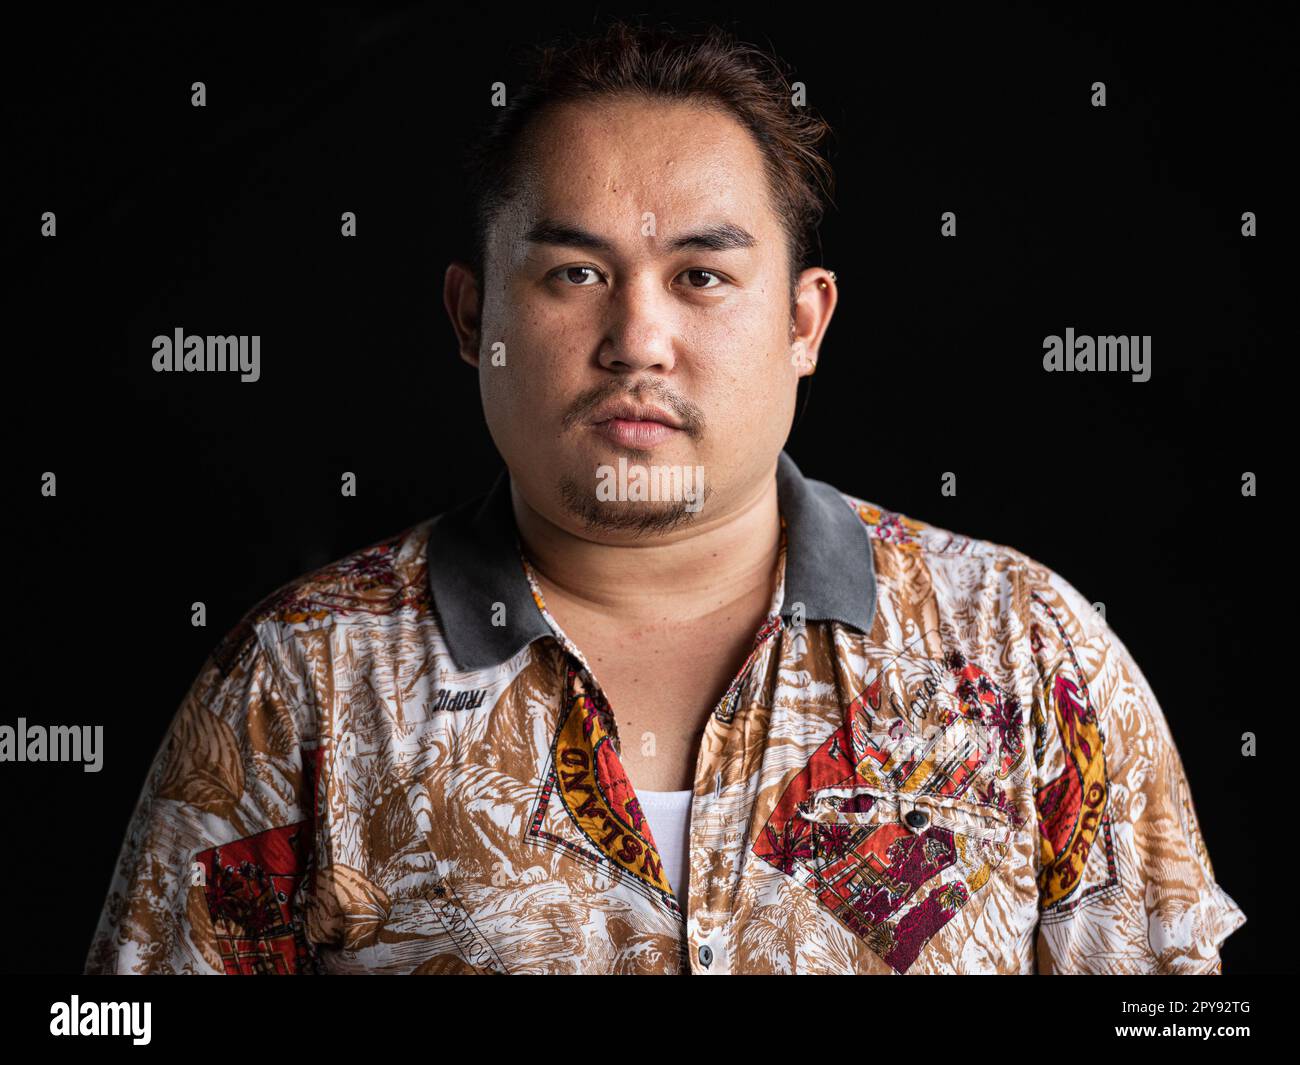 Portrait of Asian man face looking at camera against black background horizontal shot Stock Photo